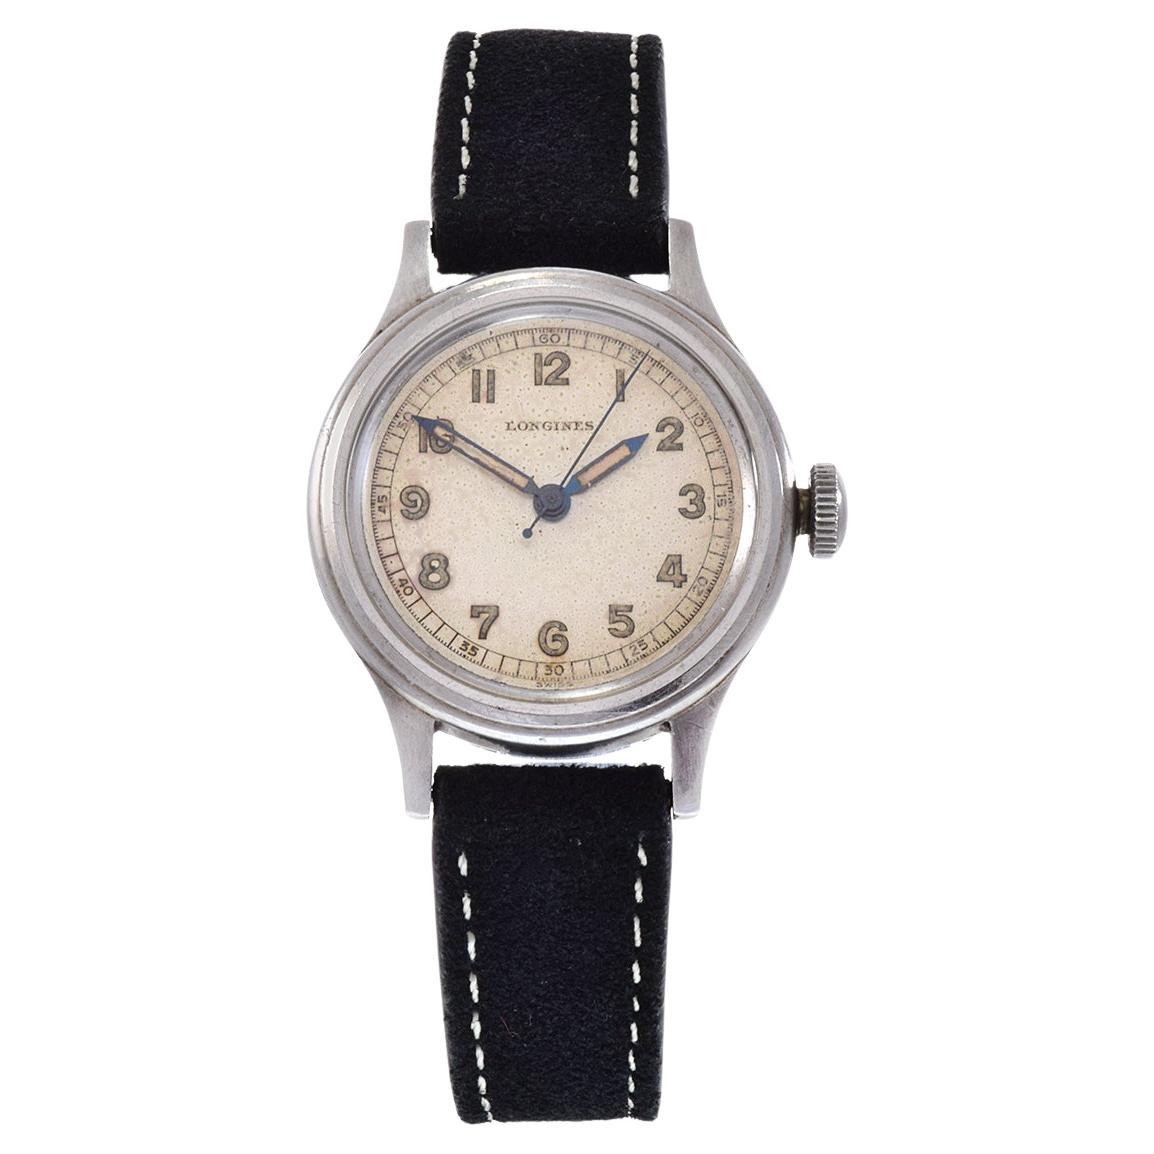 Vintage 1940's Longines Sei Tacche Military Style Watch